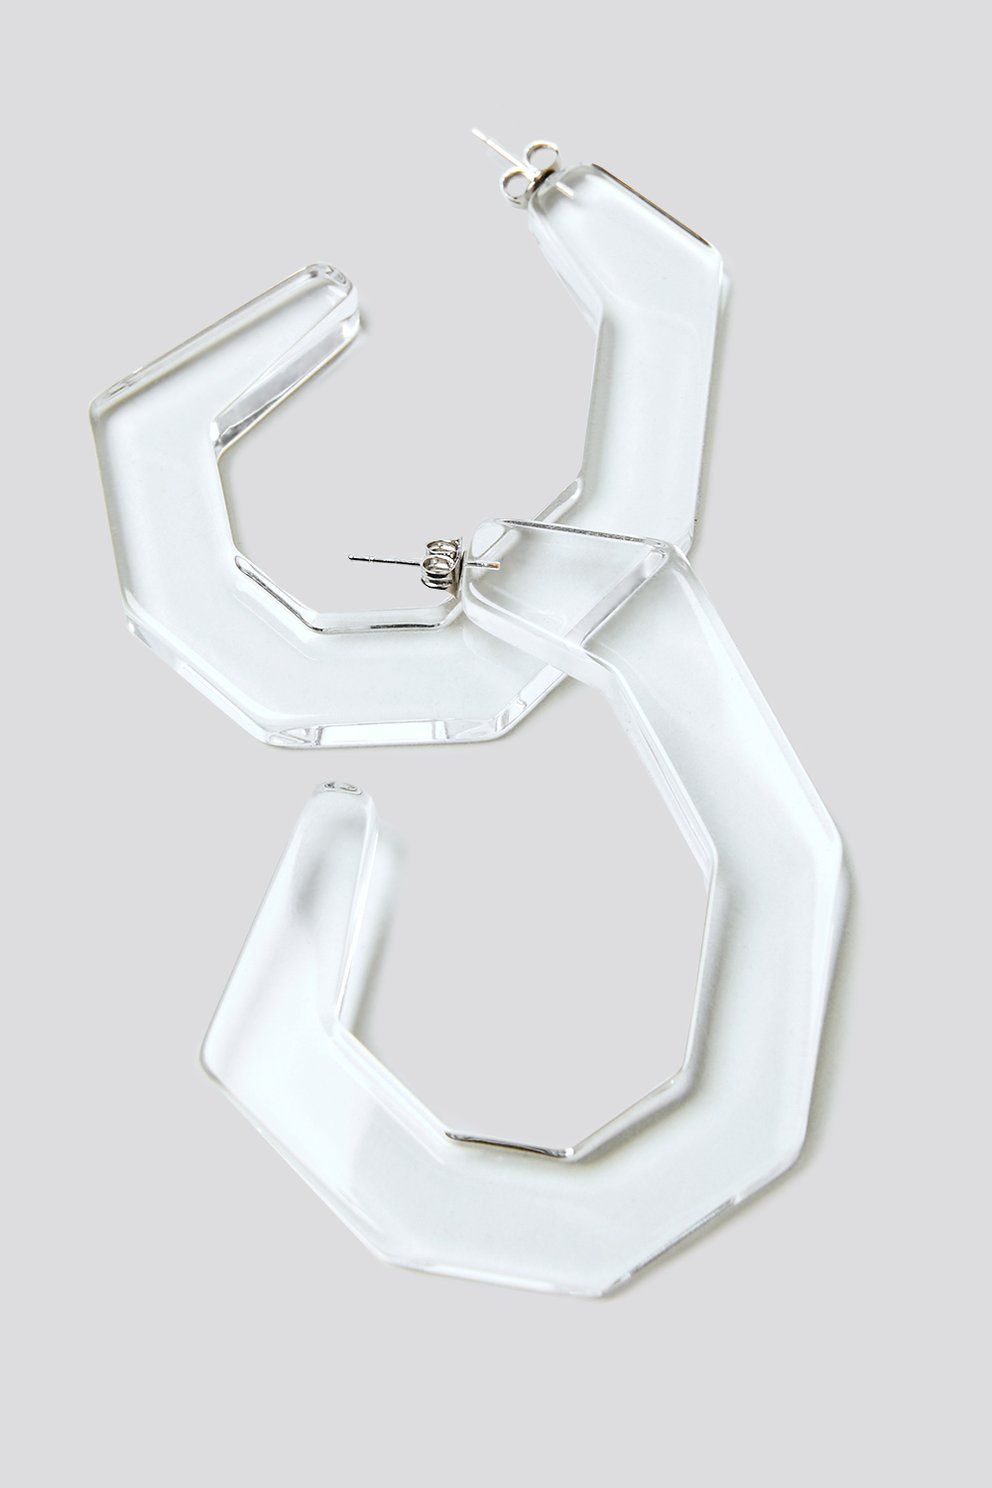 lucite hoop earrings are all the rage & we want in